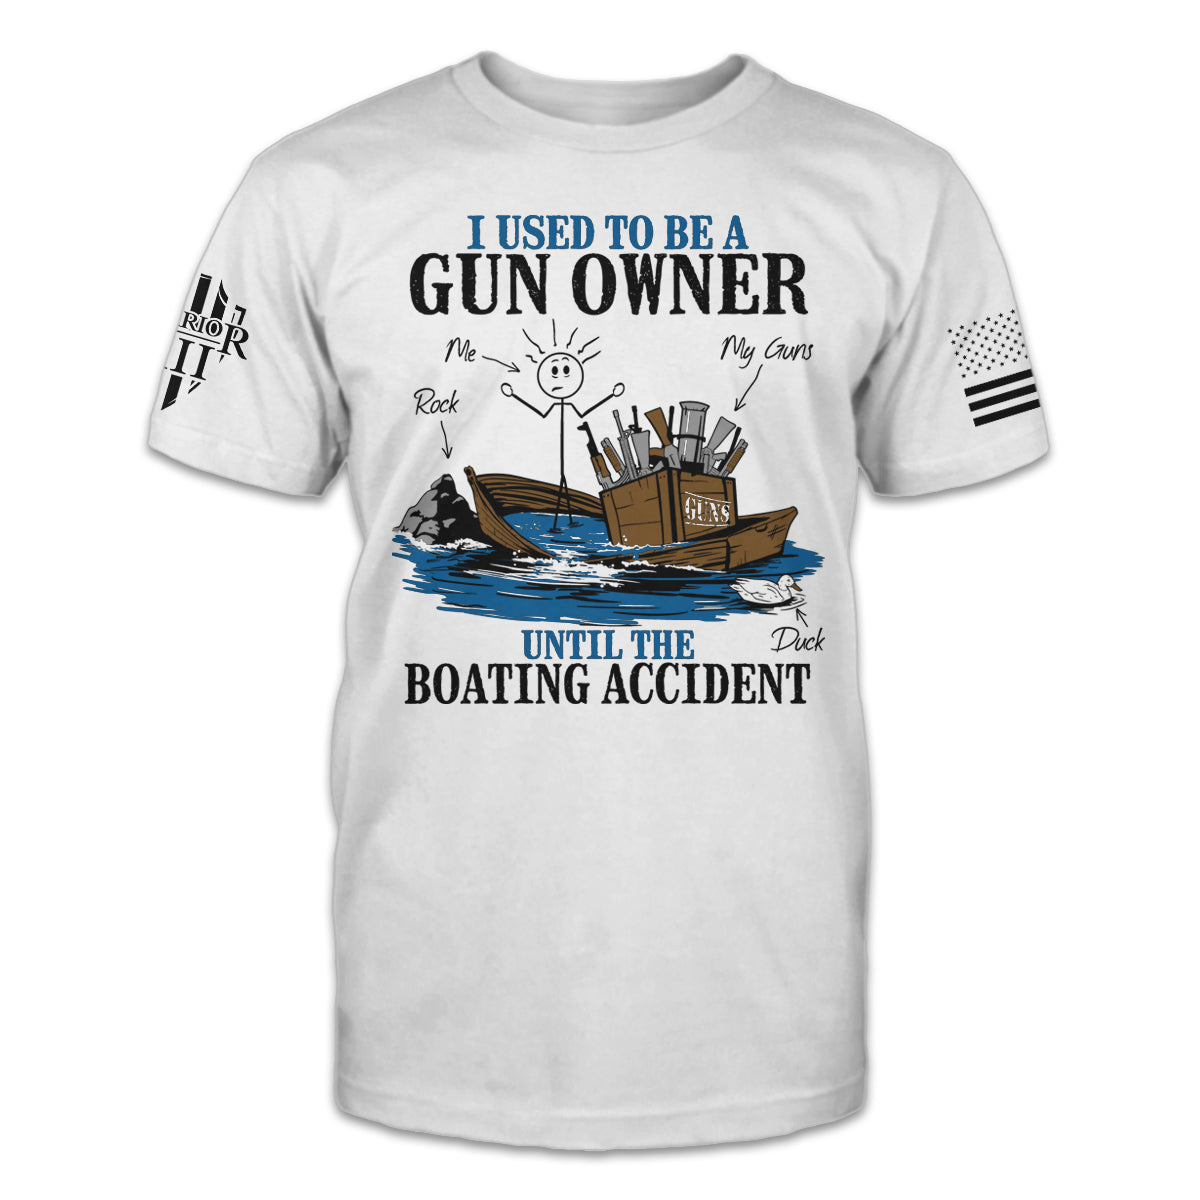 A white t-shirt with the words "I Used to be A Gun Owner Until The Boating Accident" and design of a stick man with guns on a sinking ship printed on the front.